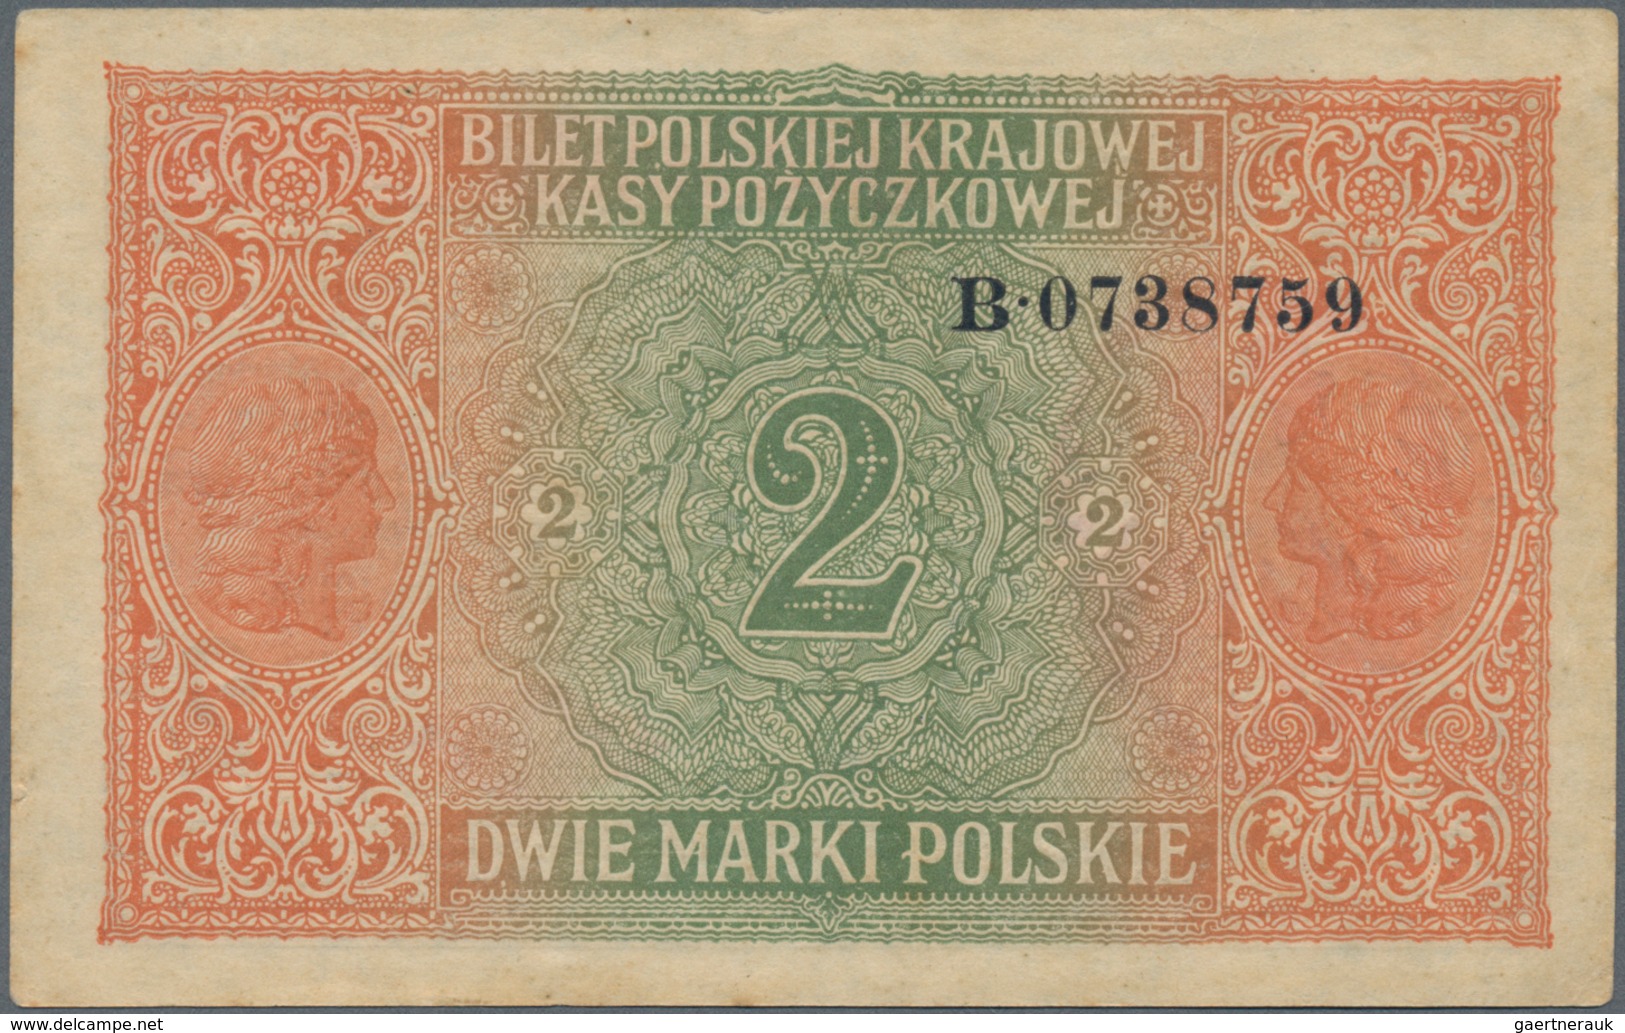 Poland / Polen: State Loan Bank of Poland set with 5 banknotes with title "Zarzad General Gubernator